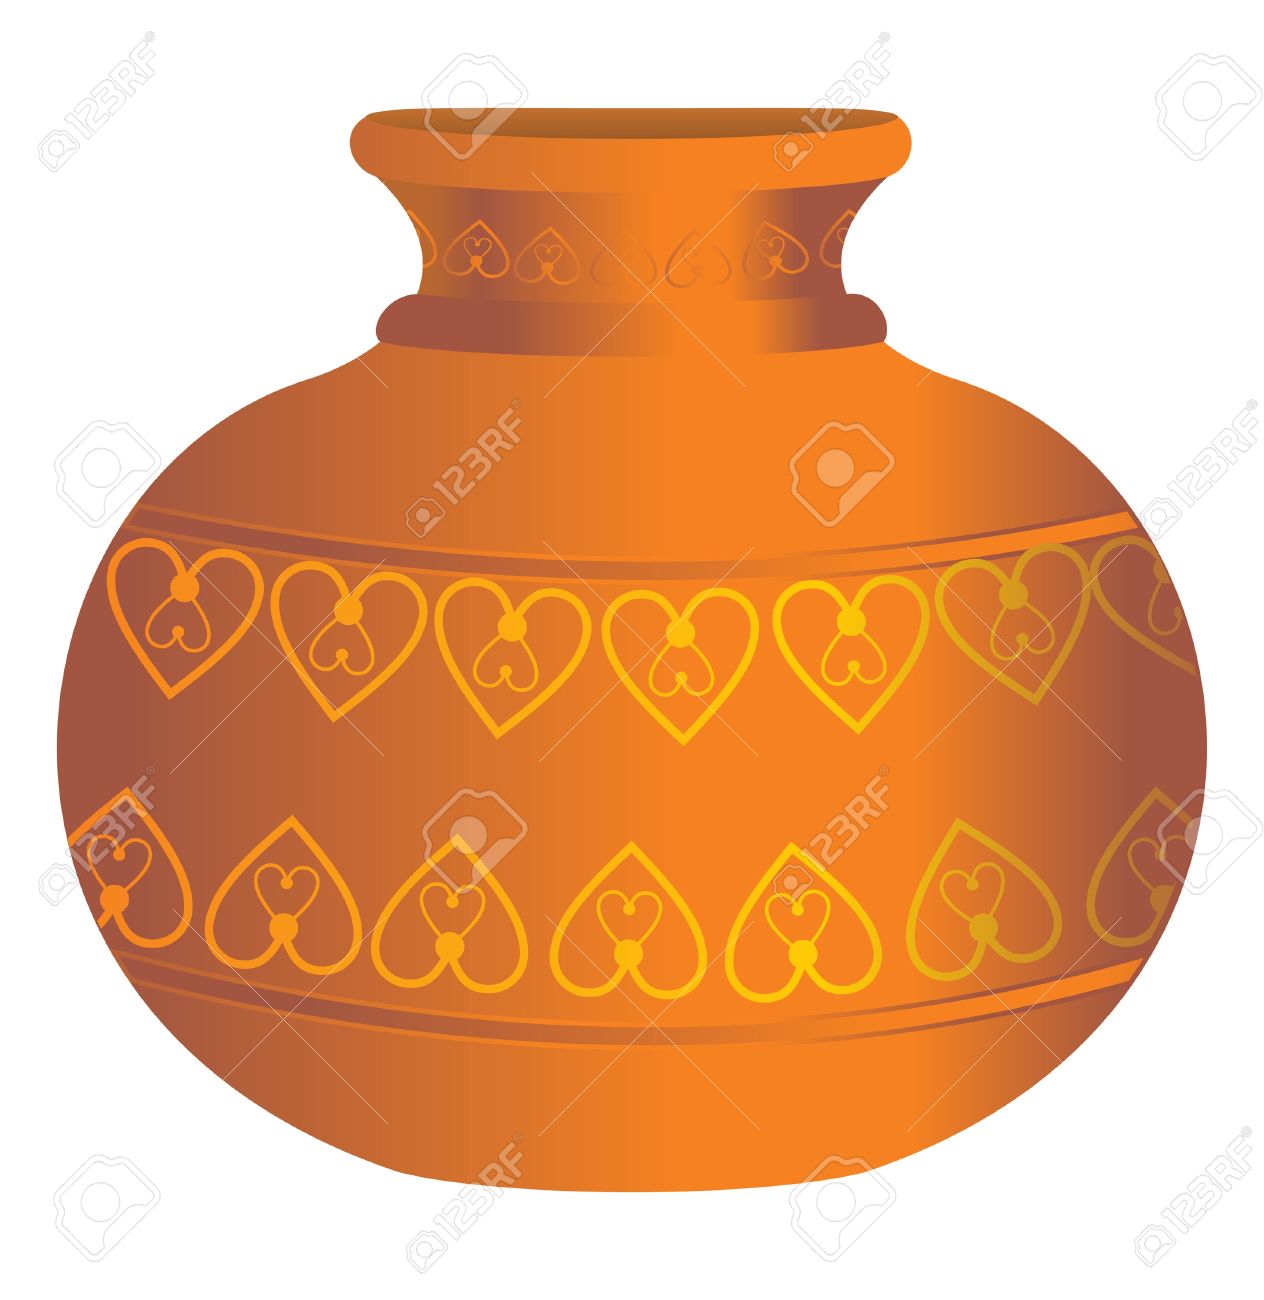 Clay water pot clipart.